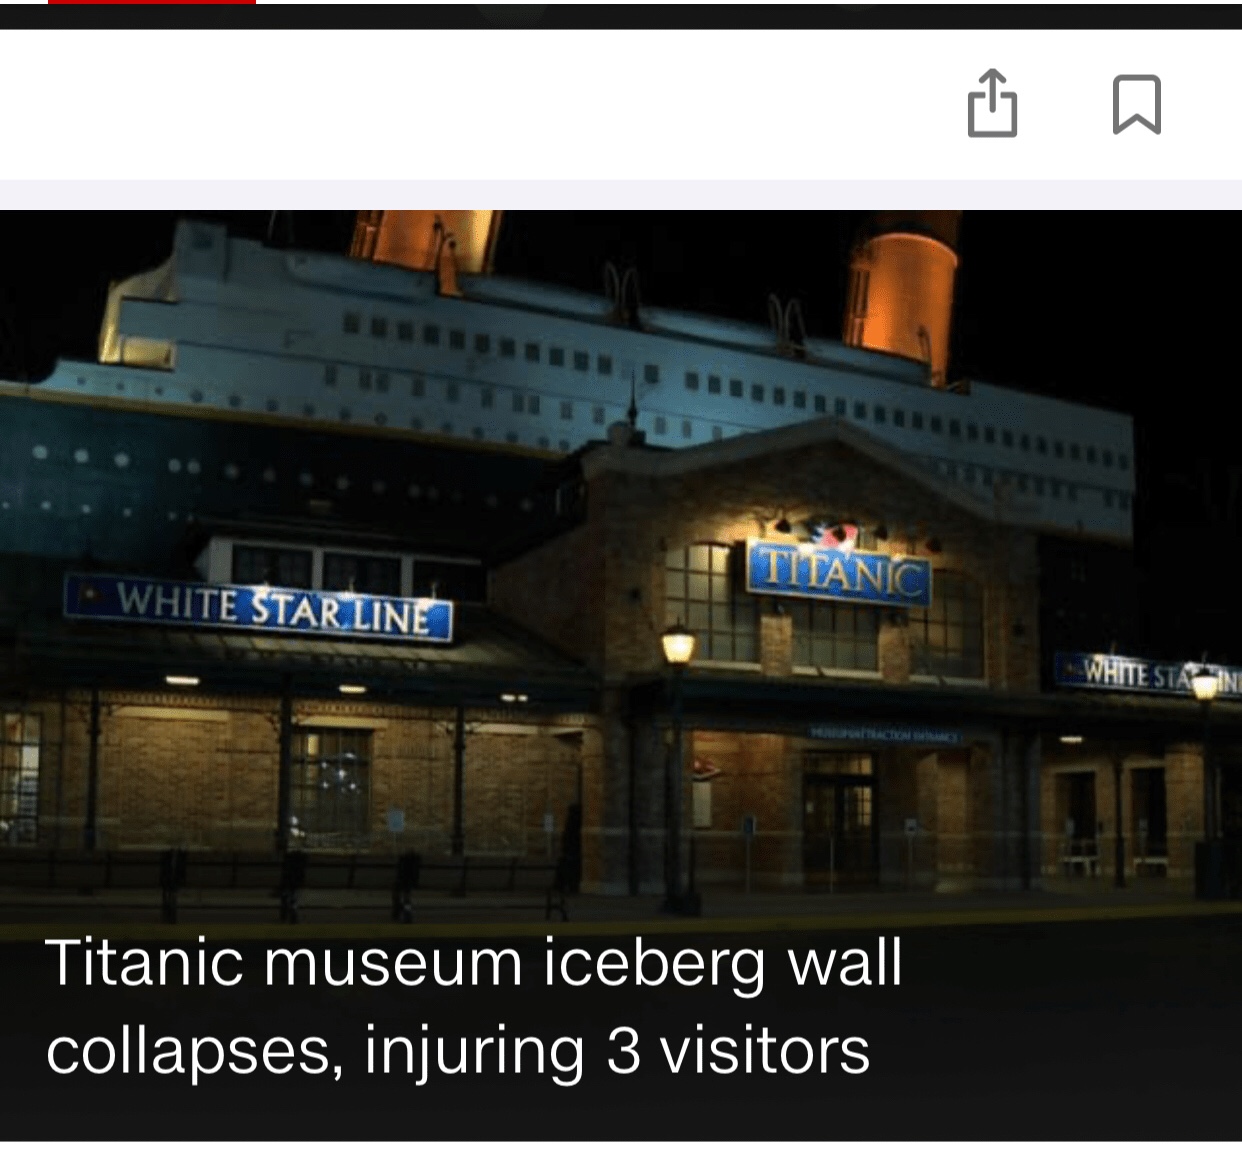 image depicts irony as titanic museum iceberg wall collapses